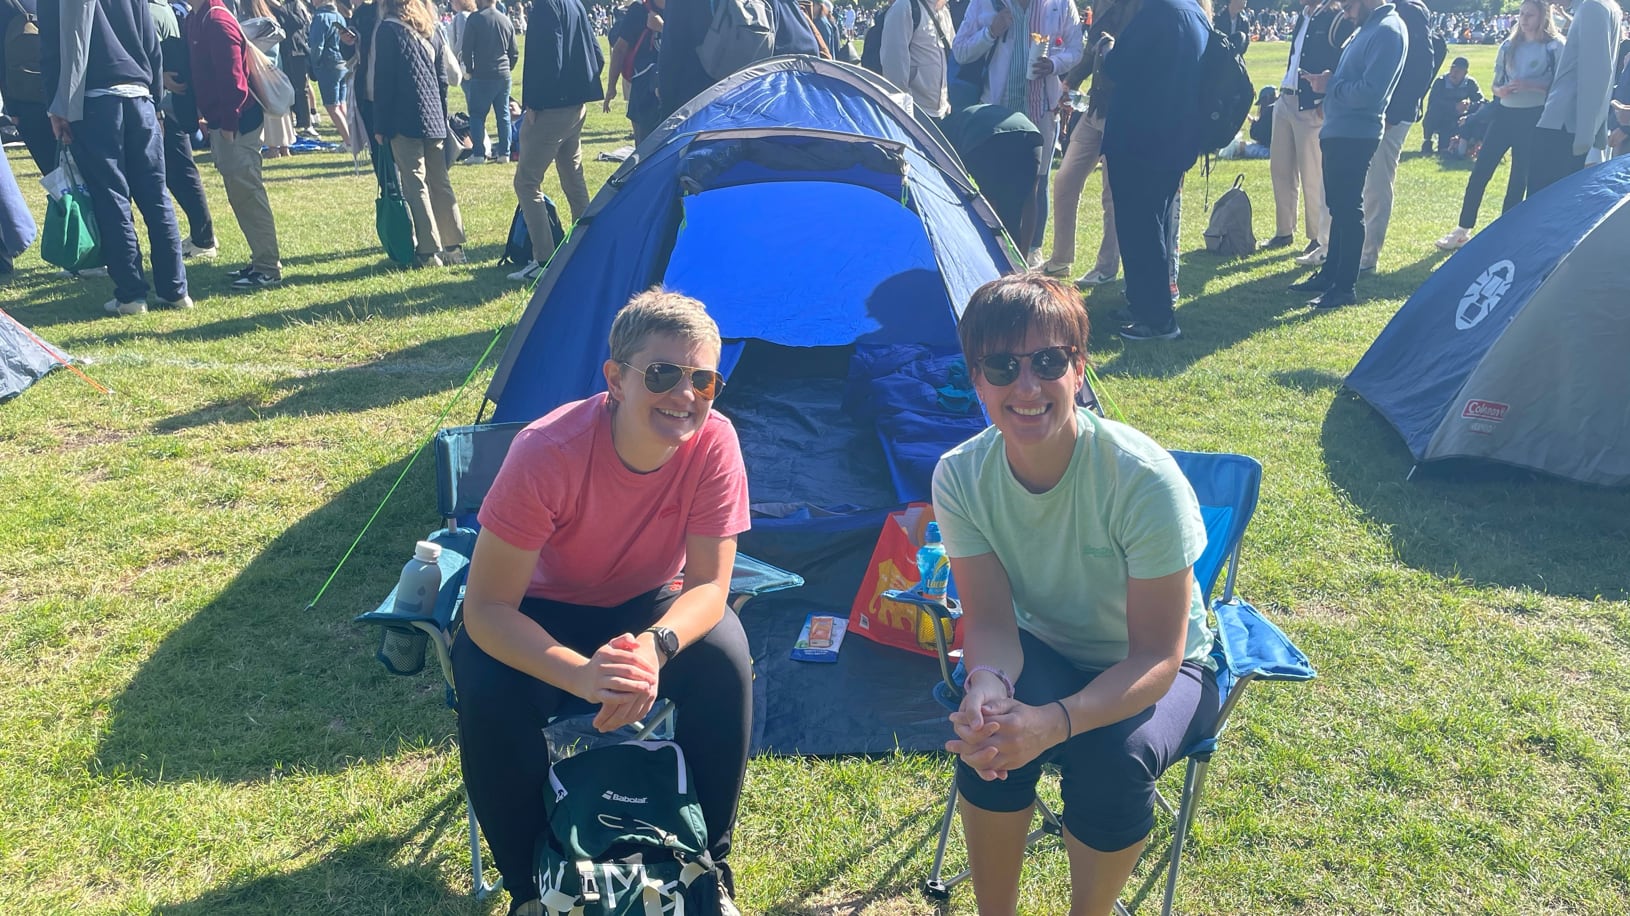 (left to right) Sarah Gill (38) and Sarah Gilchrist (37) from Coleraine have been queueing at Wimbledon since 5pm on Sunday, waiting to see Andy Murray play what could be his last singles game at Wimbledon. Picture by Luke O'Reilly/PA Wire